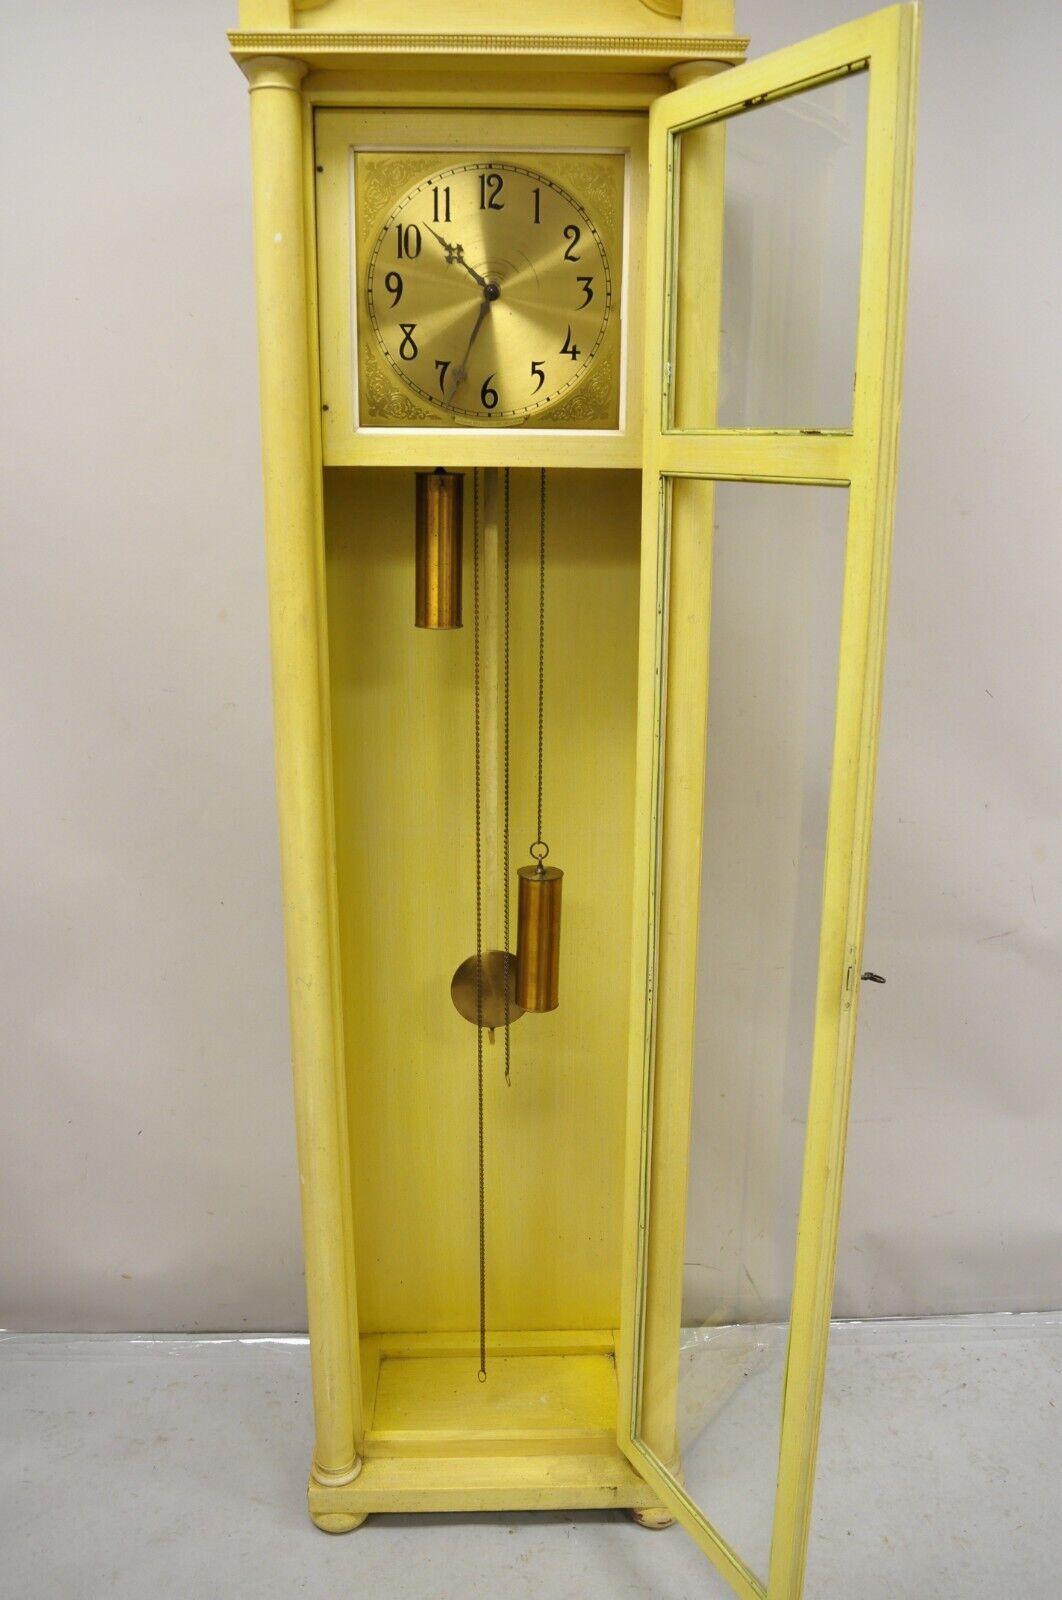 Antique Colonial Mfg. Co Beige Painted Tall Case Federal Style Grandfather Clock. Item features a working lock and key, includes all parts pictured. Very nice vintage clock Circa Early 20th Century. Measurements: 81